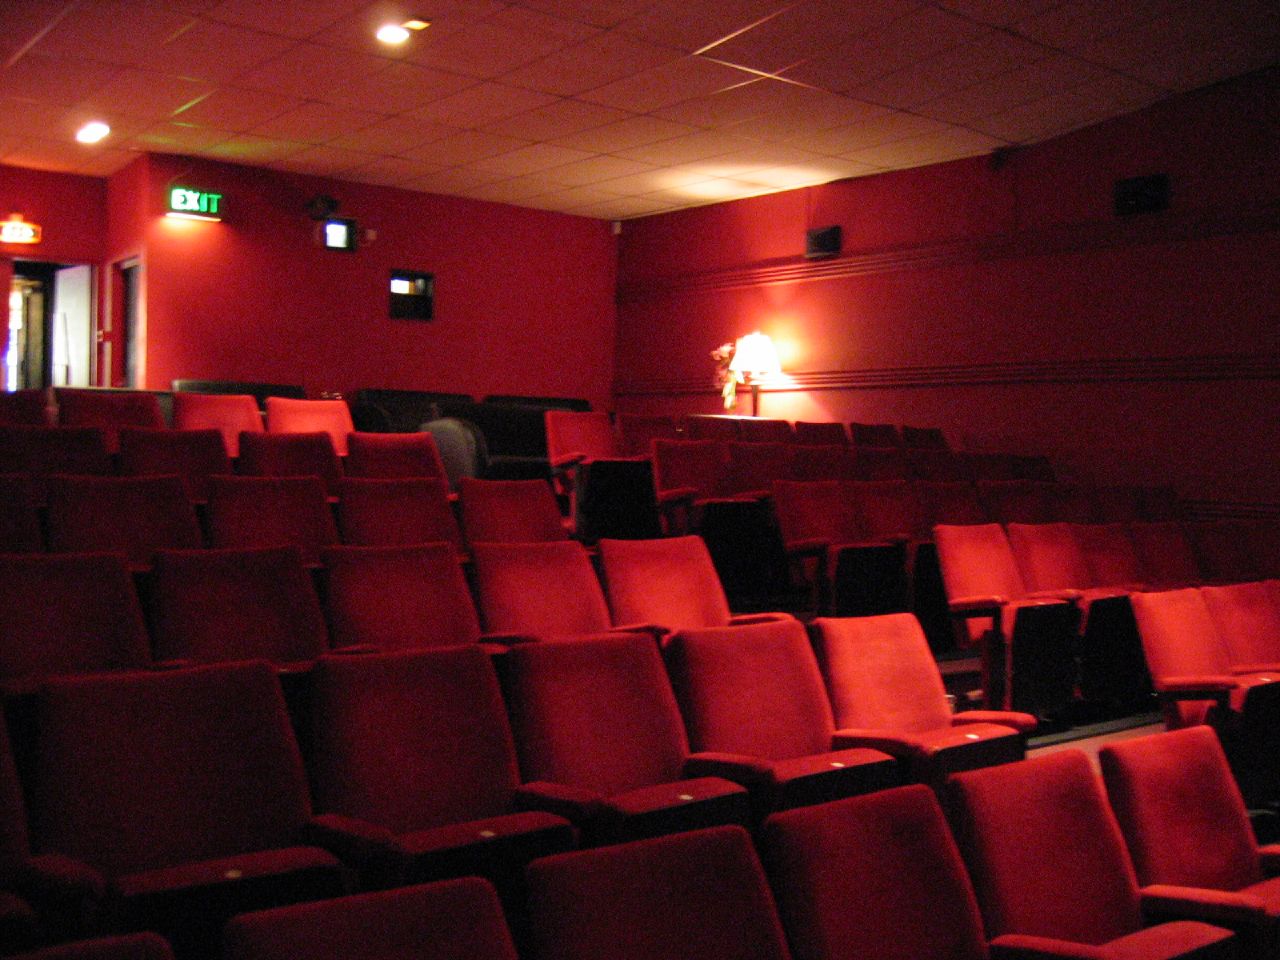 Rows of red velvet seats in a cinema